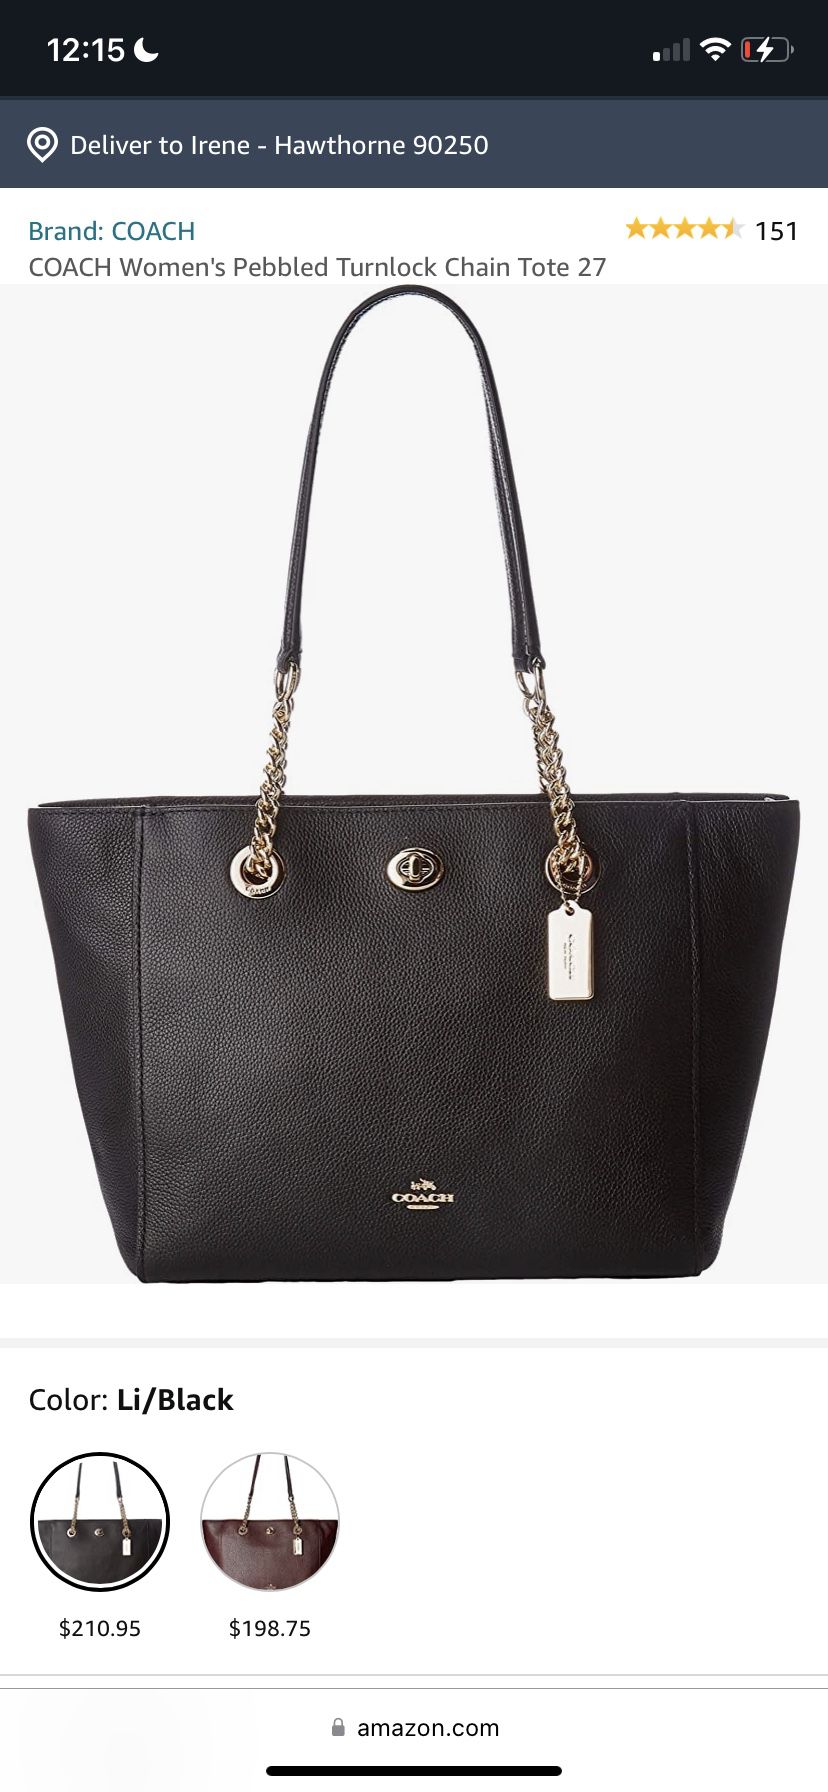 Coach Women's Pebbled Turnlock Chain Tote